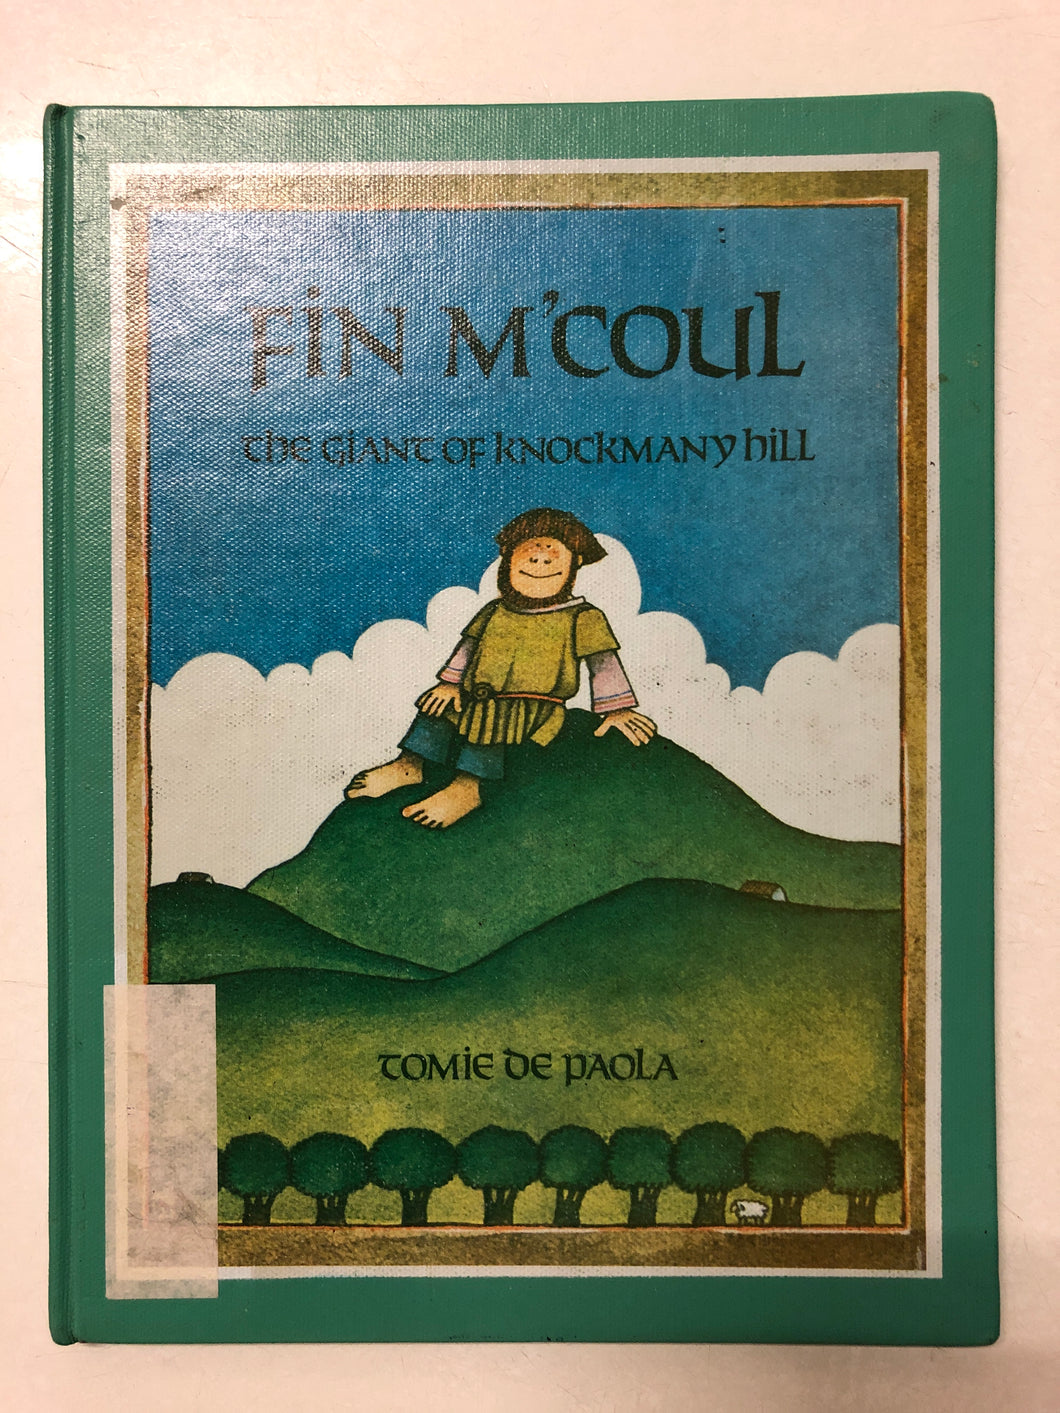 Fin M’Coul The Giant of Knockmany Hill - Slick Cat Books 